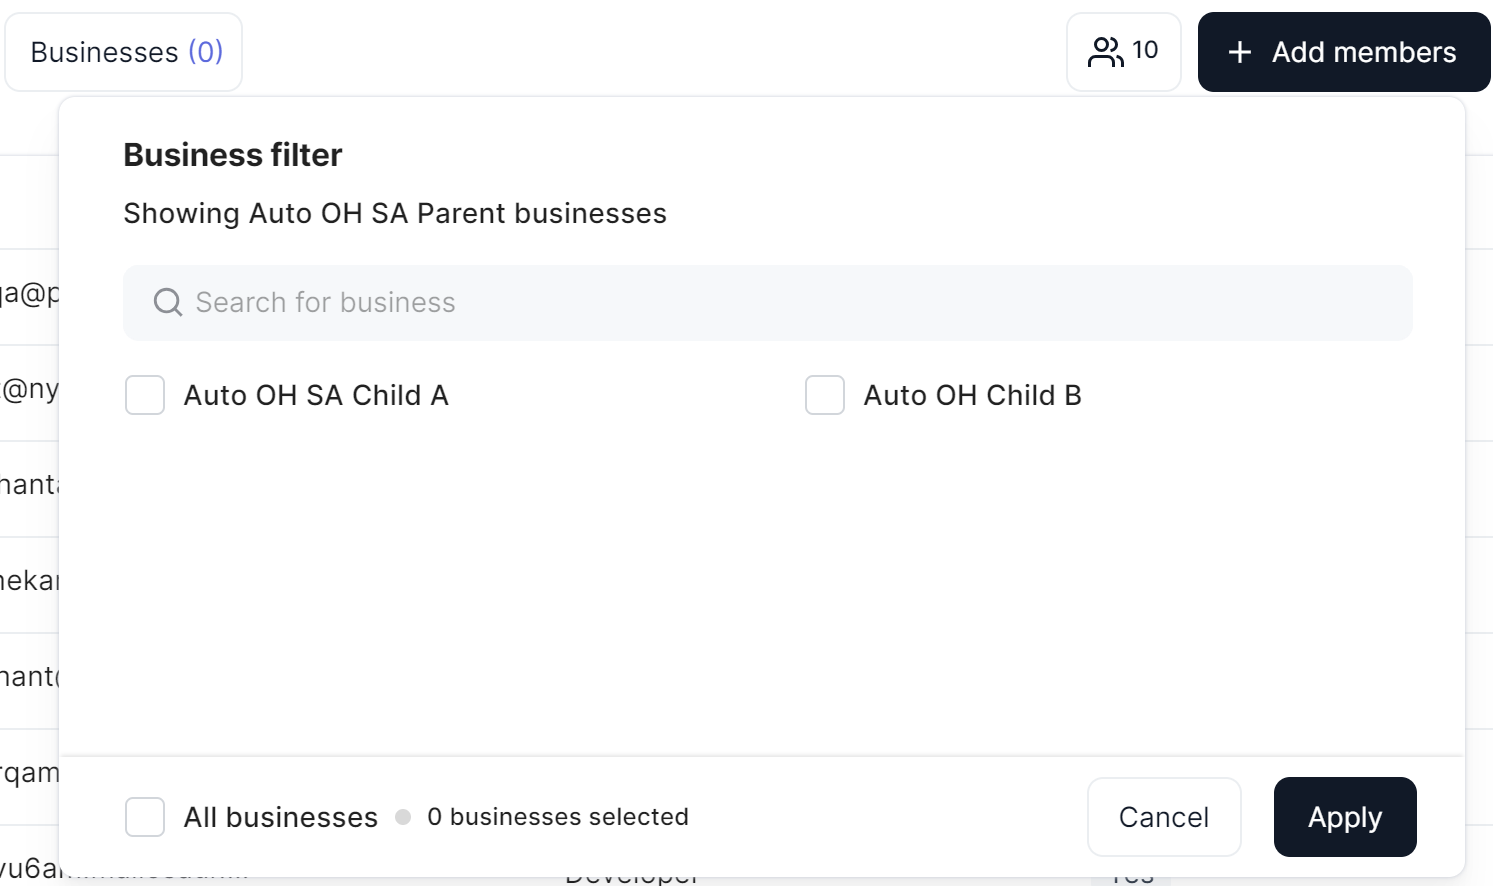 The business filter enables you to select the businesses whose team members you want to manage.